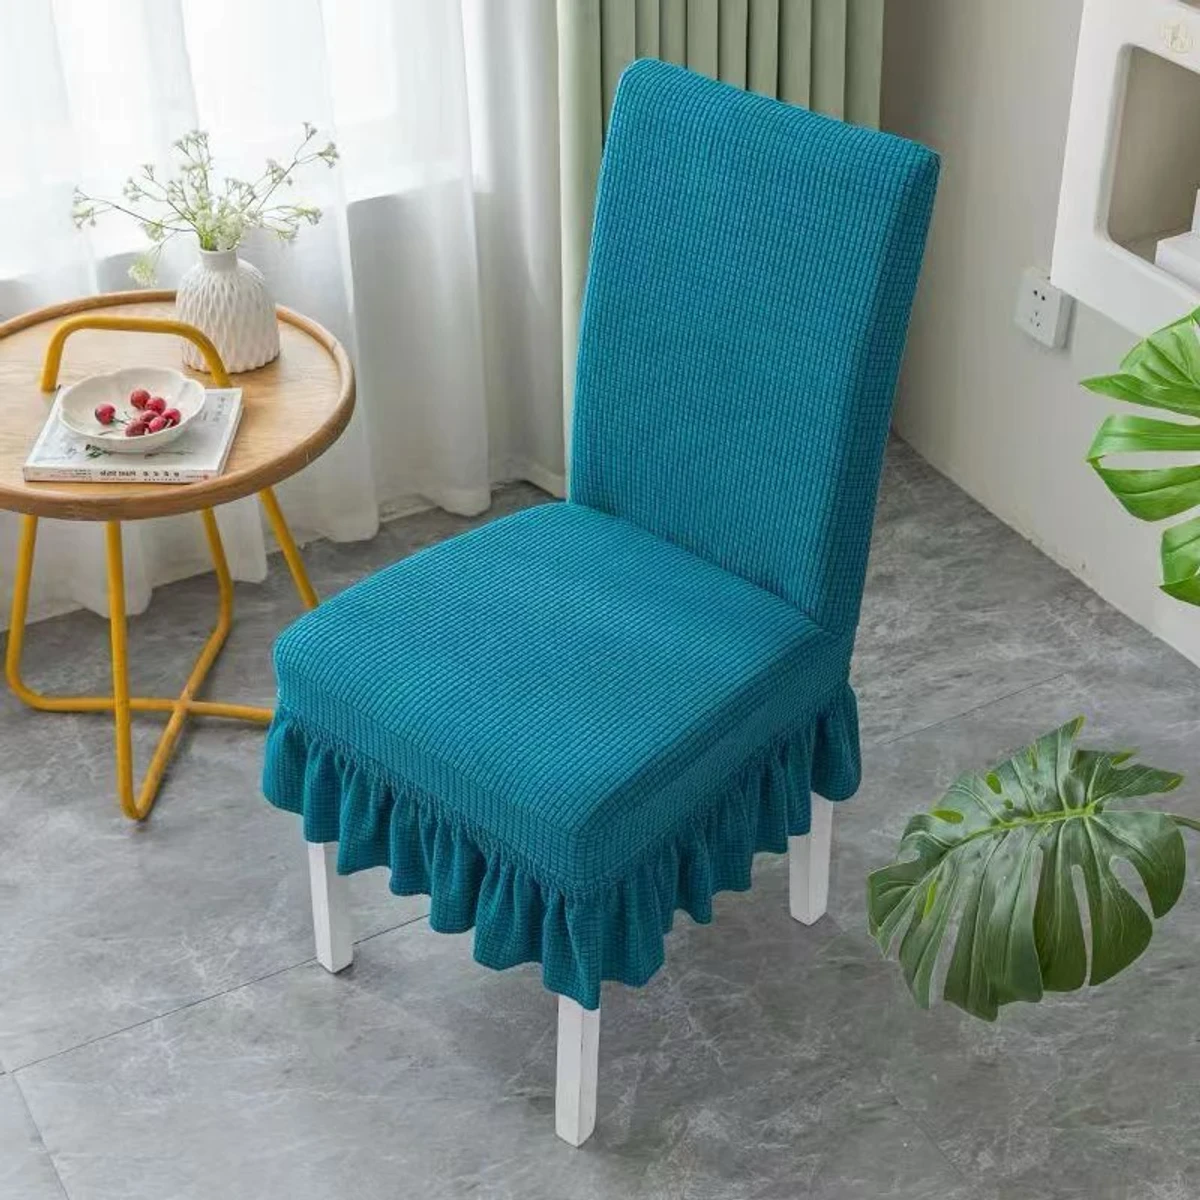 Solid Color Chair Covers for Dining Room Seat (sky blue)